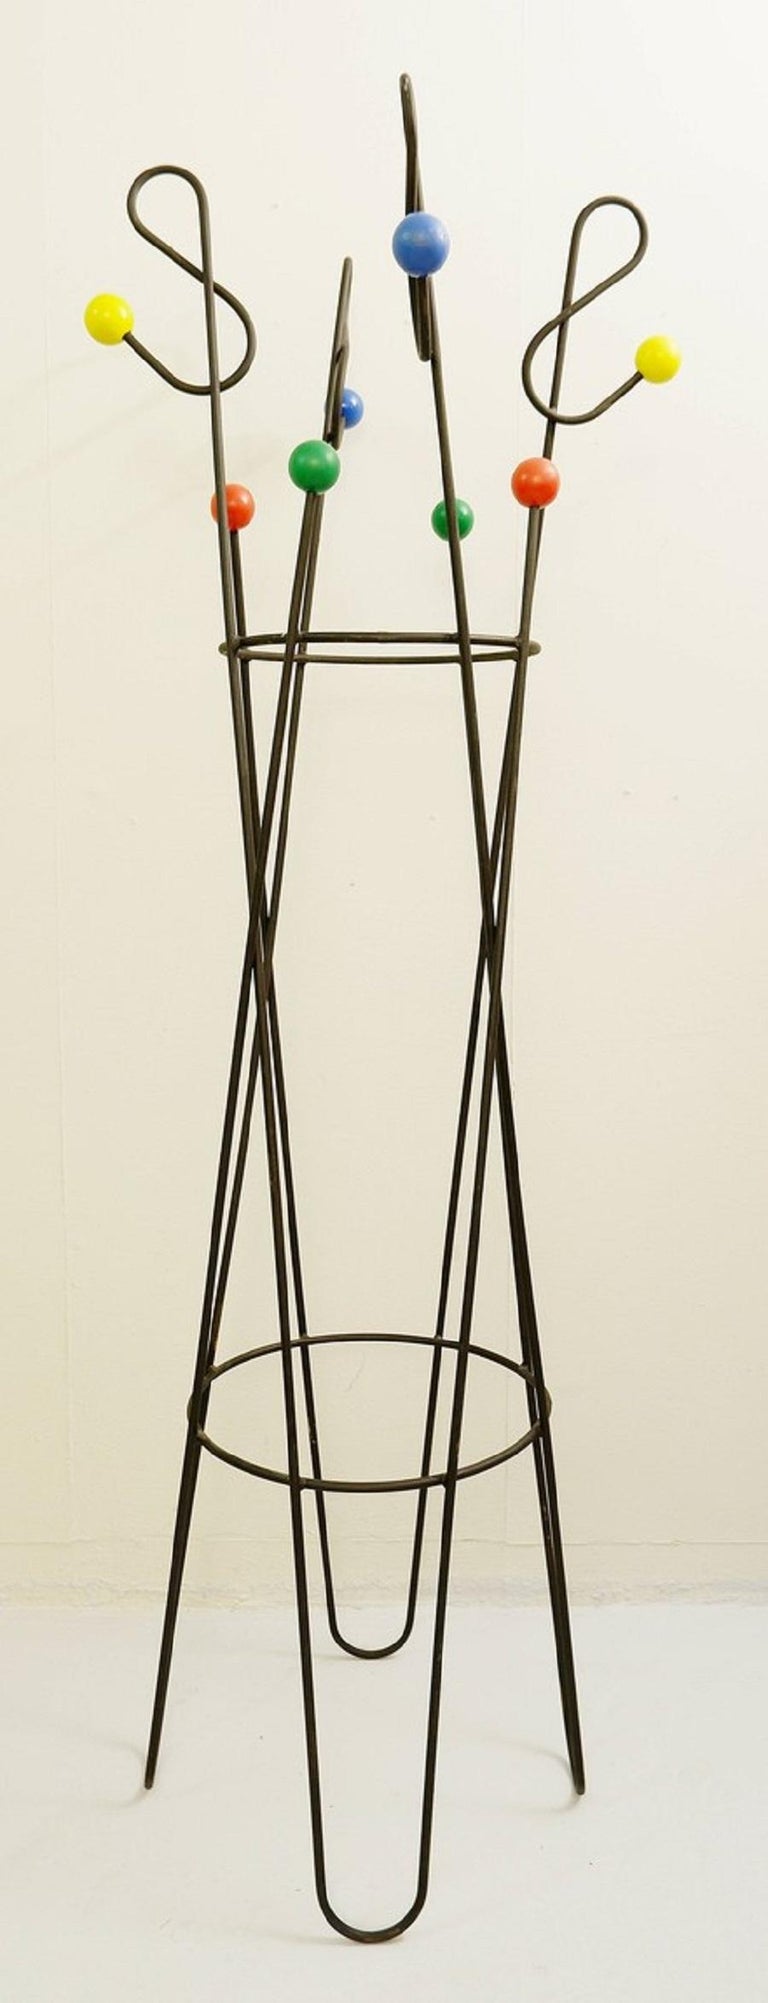 Clef De Sol" Coat Rack by Roger Feraud, 1950s For Sale at 1stDibs